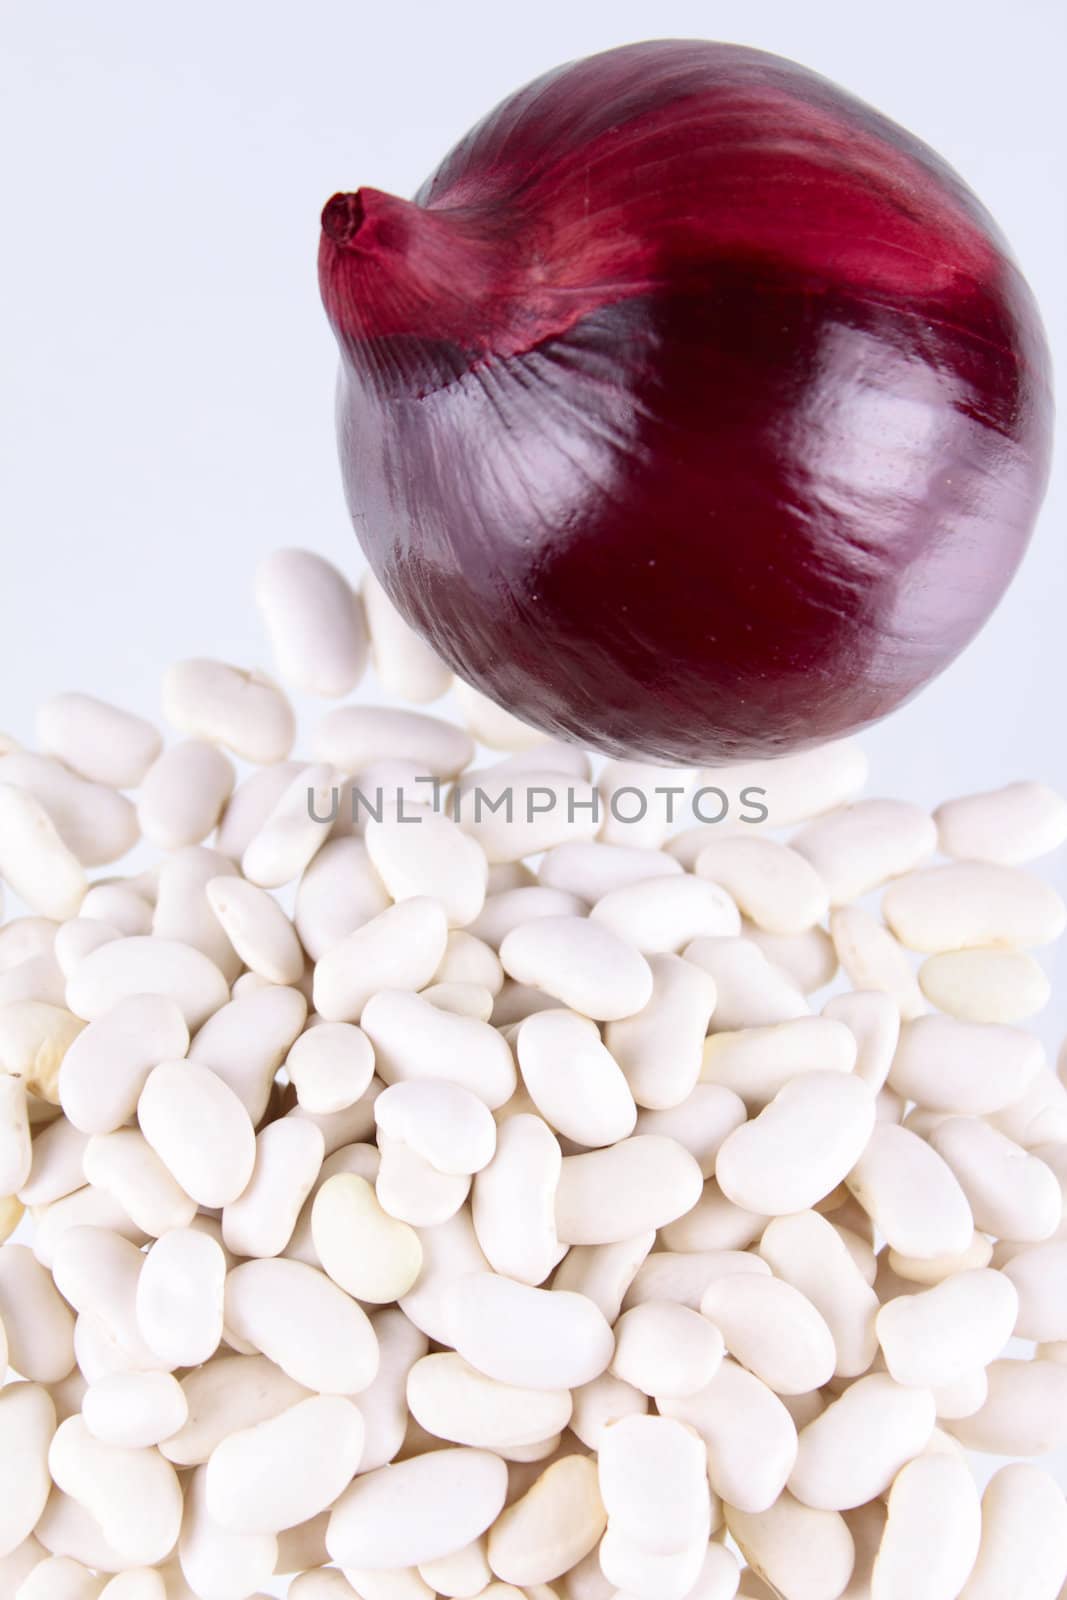 White string bean and red salad onions removed on a white background without isolation